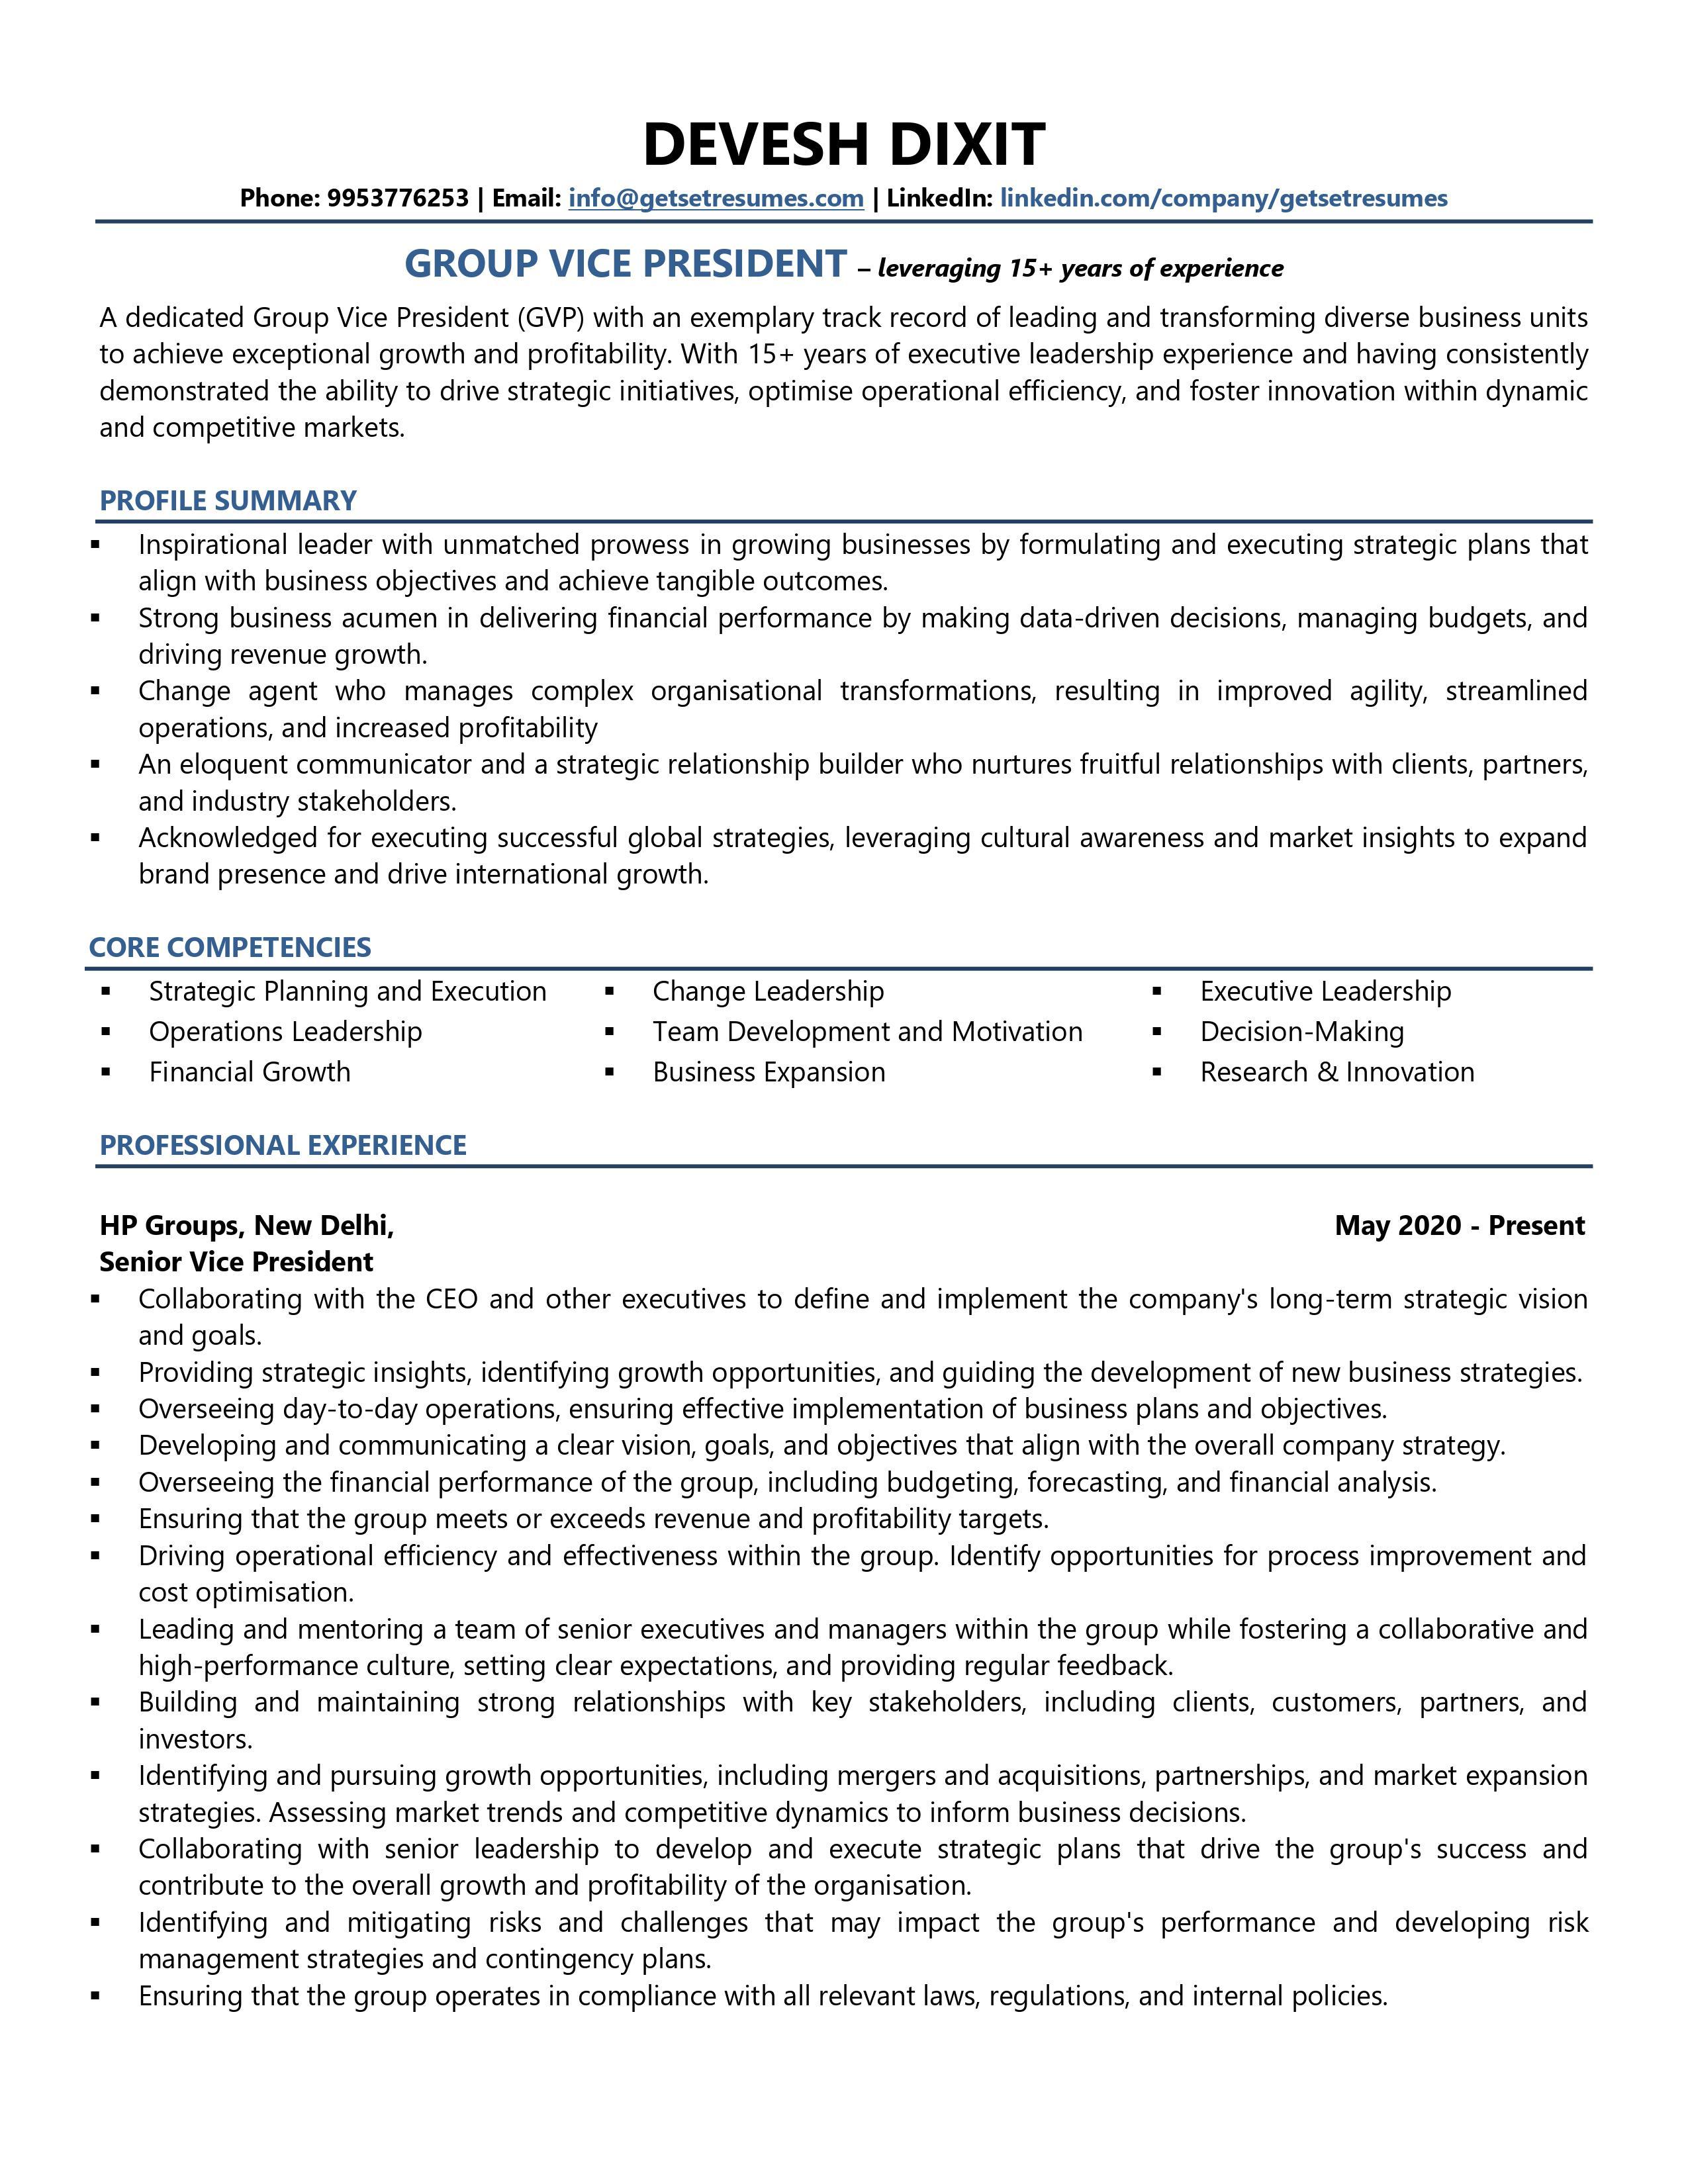 Group Vice President - Resume Example & Template